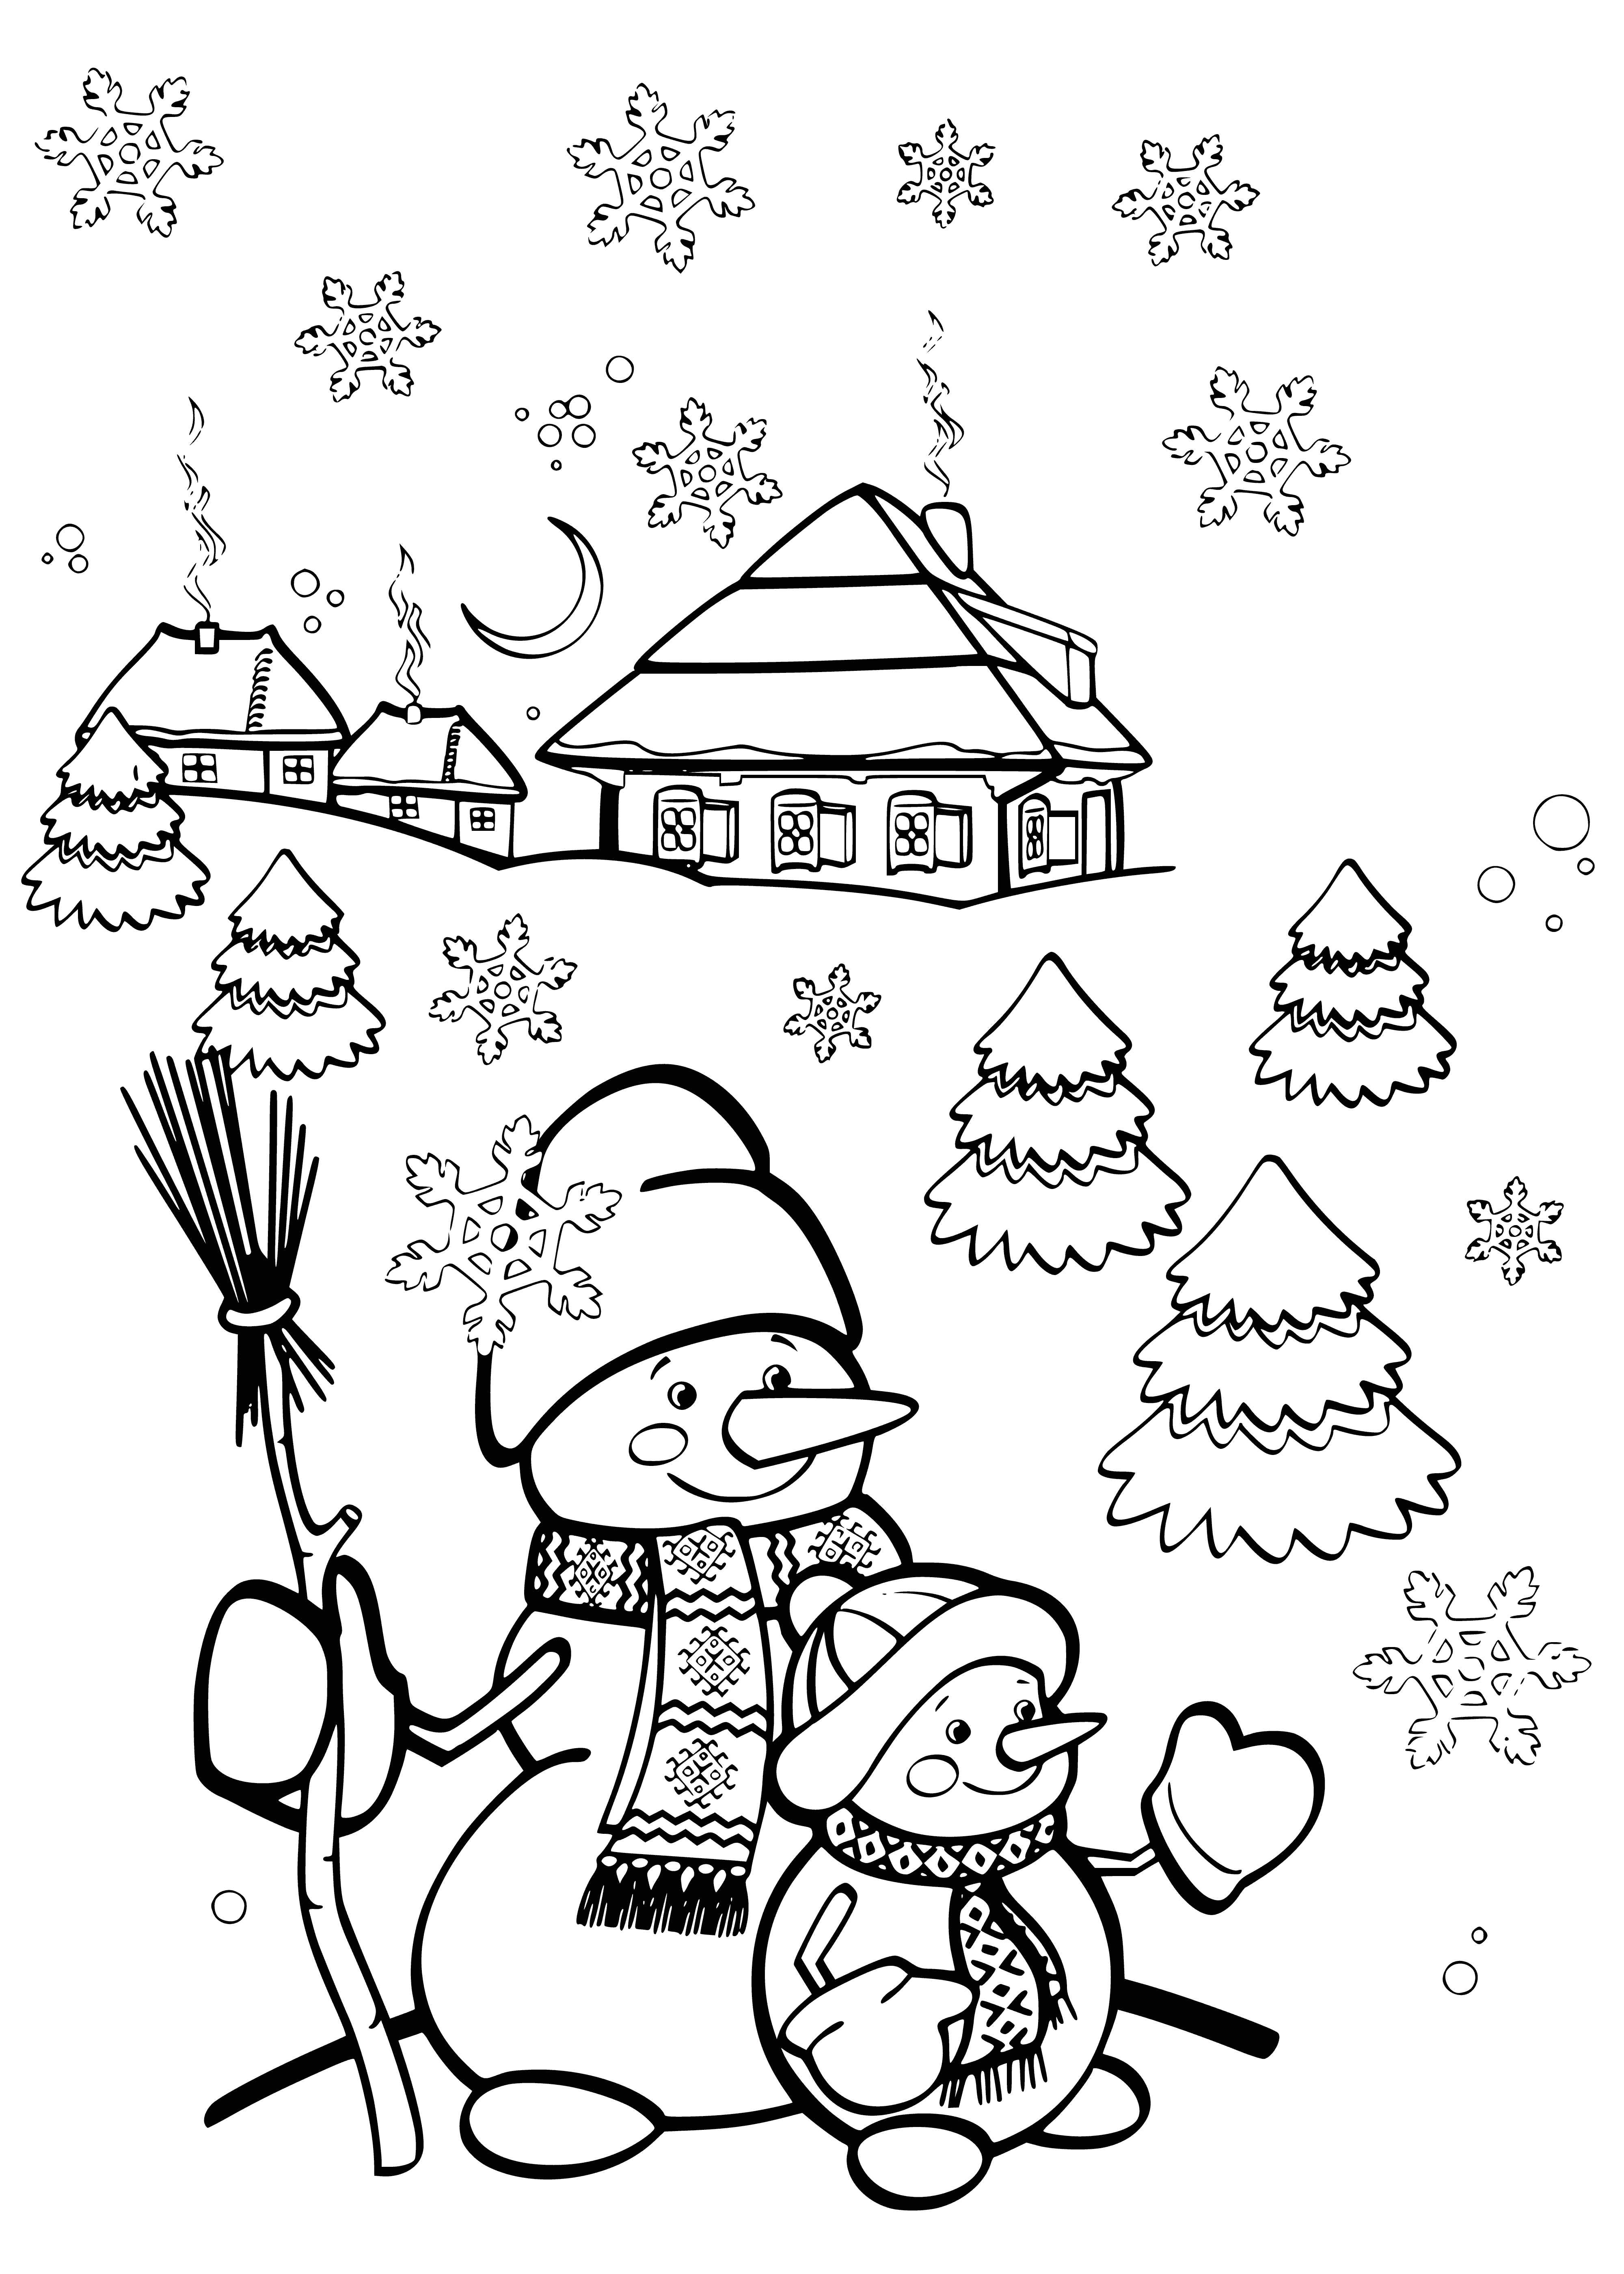 coloring page: 3 snowmen of diff. sizes have carrot, branch & button noses & hats; coal eyes & mouths; sticks for arms. #KidCraft #ColoringPage